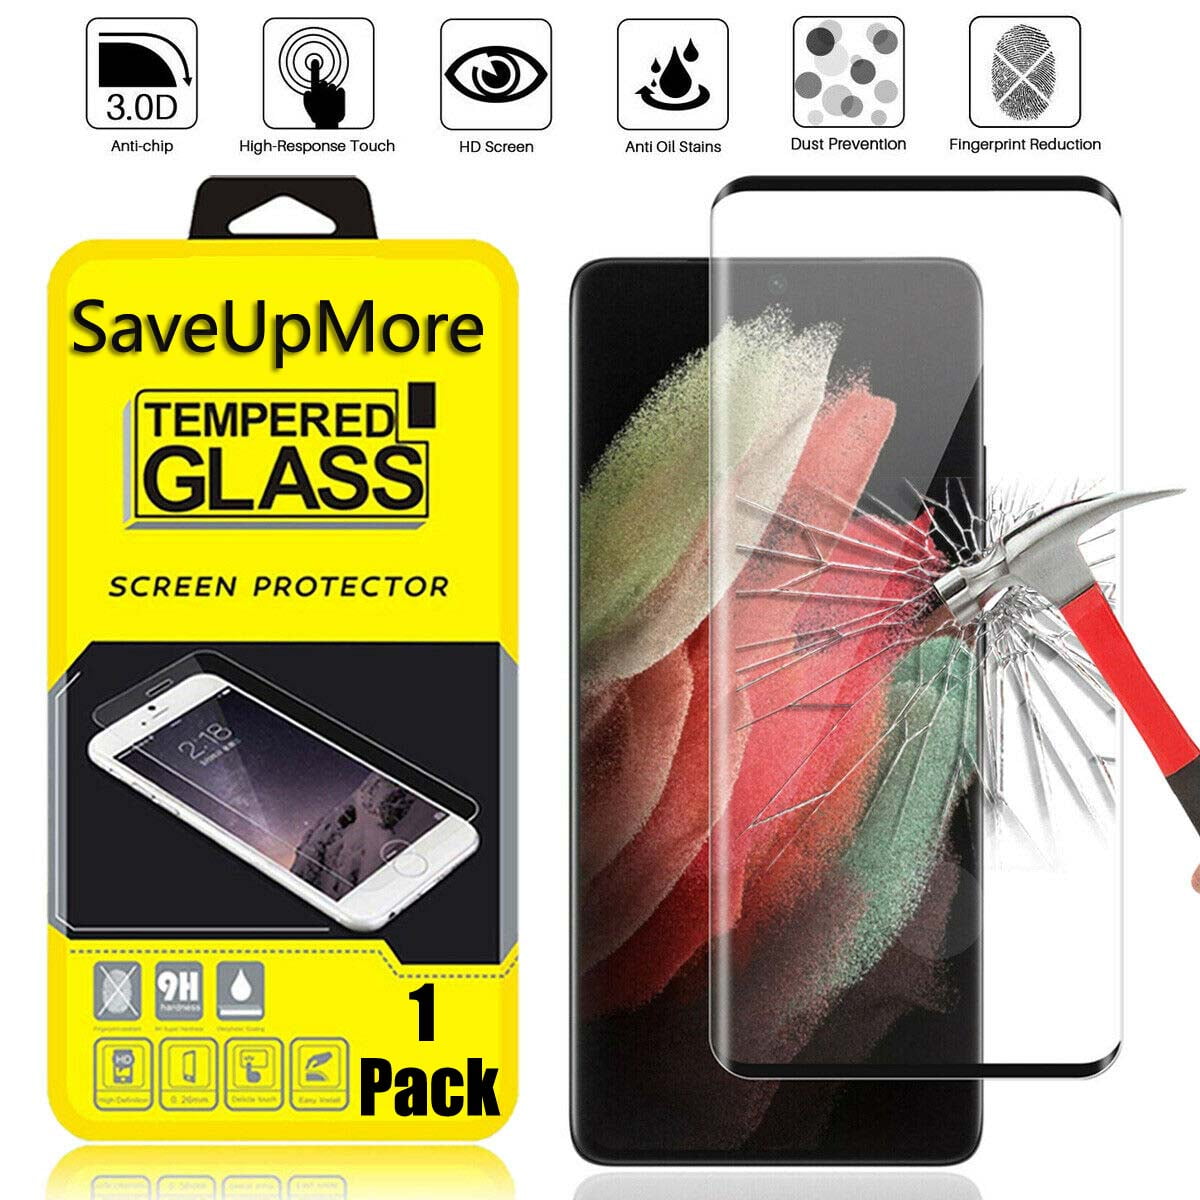 6X Savvies Ultra-Clear Screen Protector for Vtech Kidizoom Twist Simple Assembly Residue-Free Removal accurately Fitting